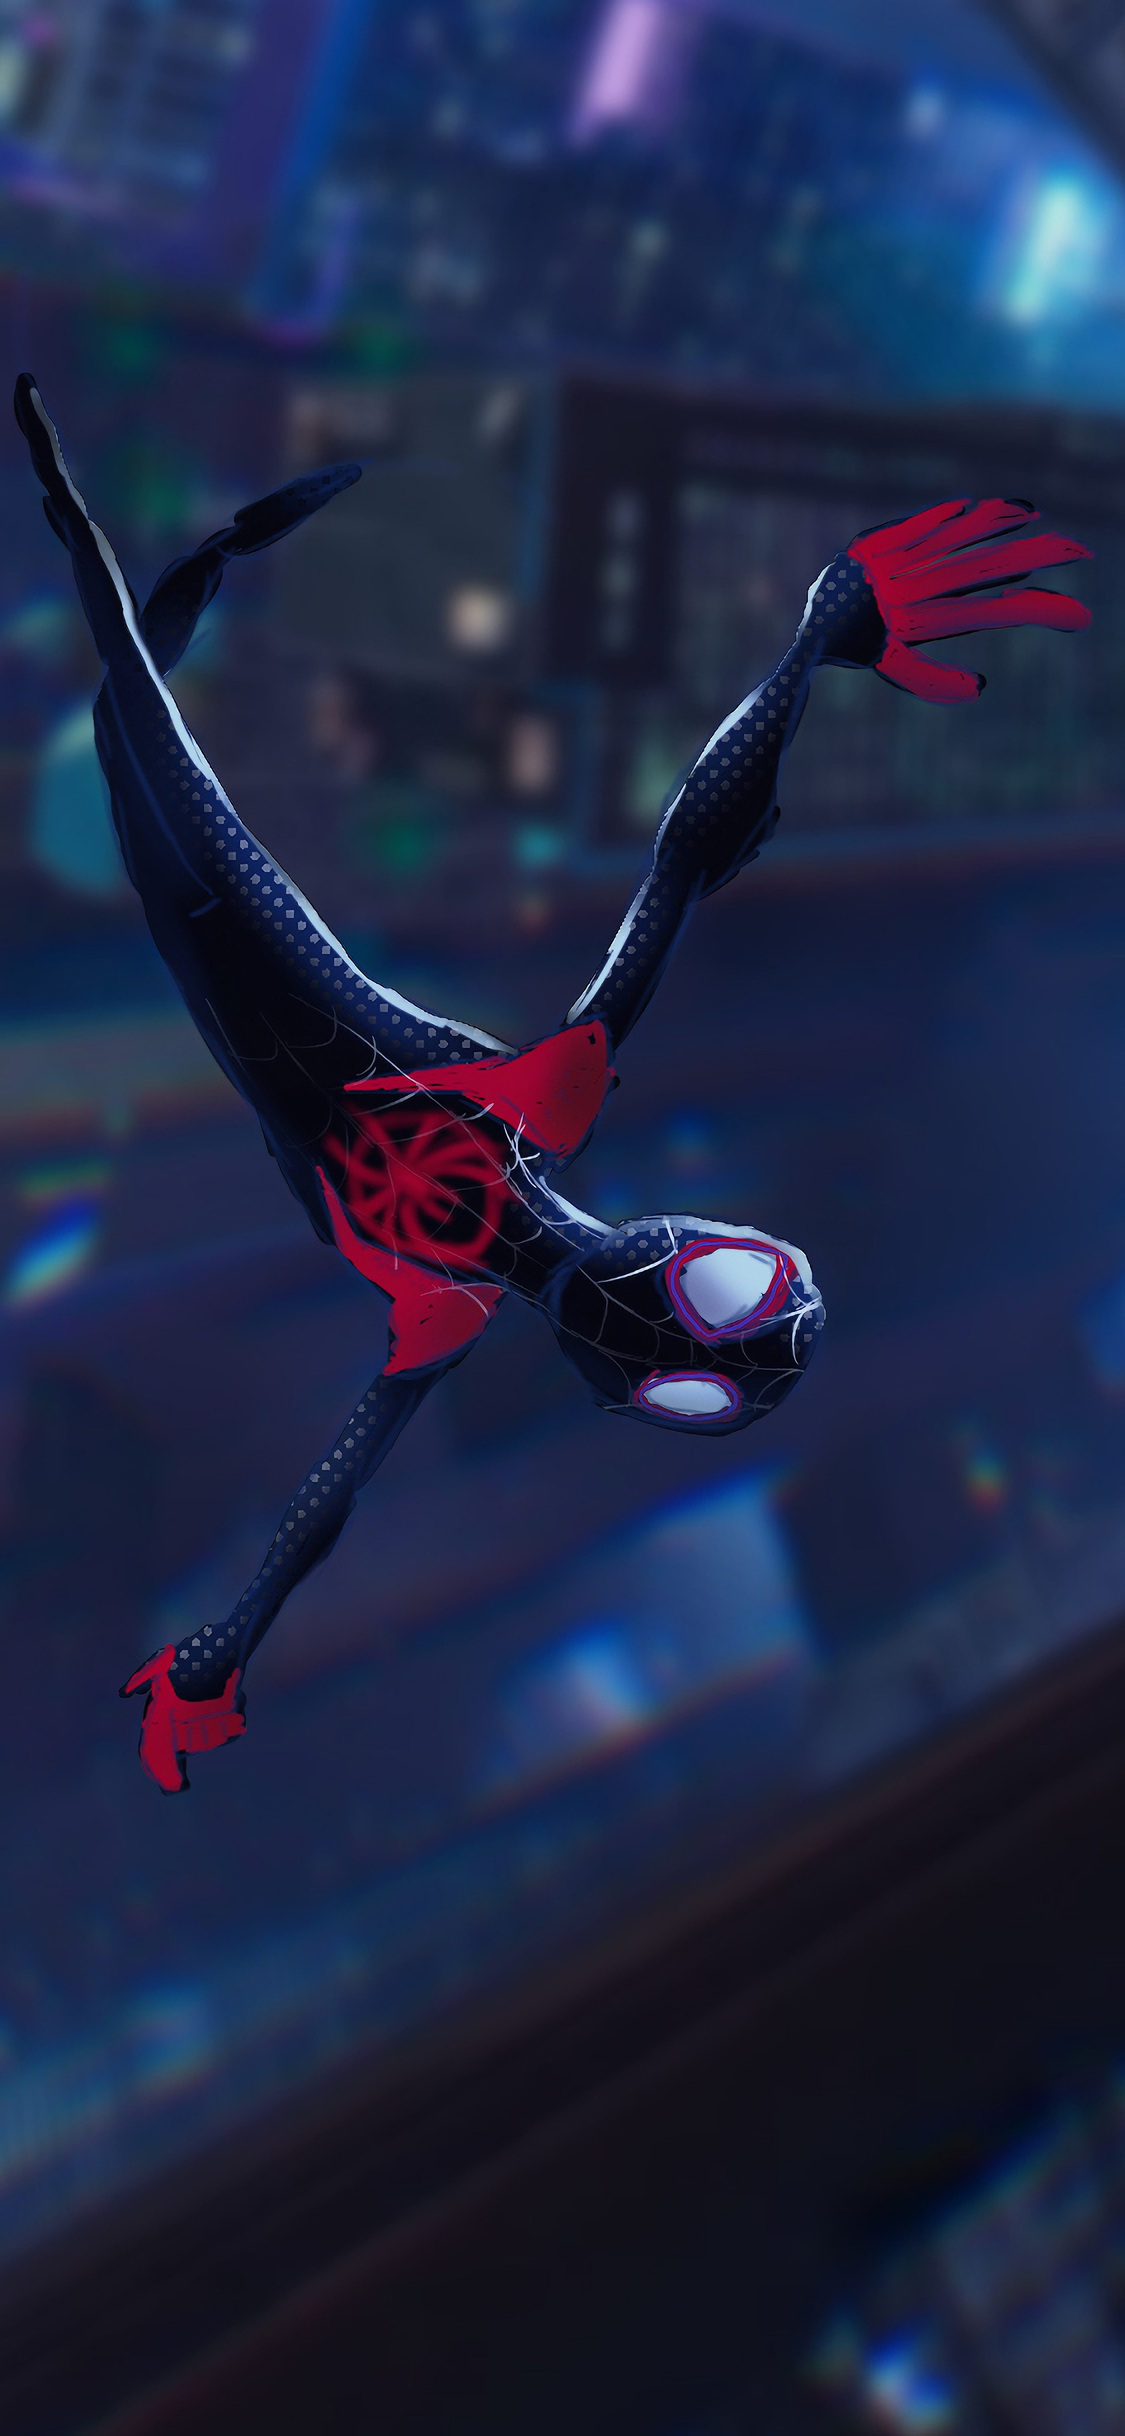 1125x2436 Spiderman Into The Spider Verse 4k Iphone Xs